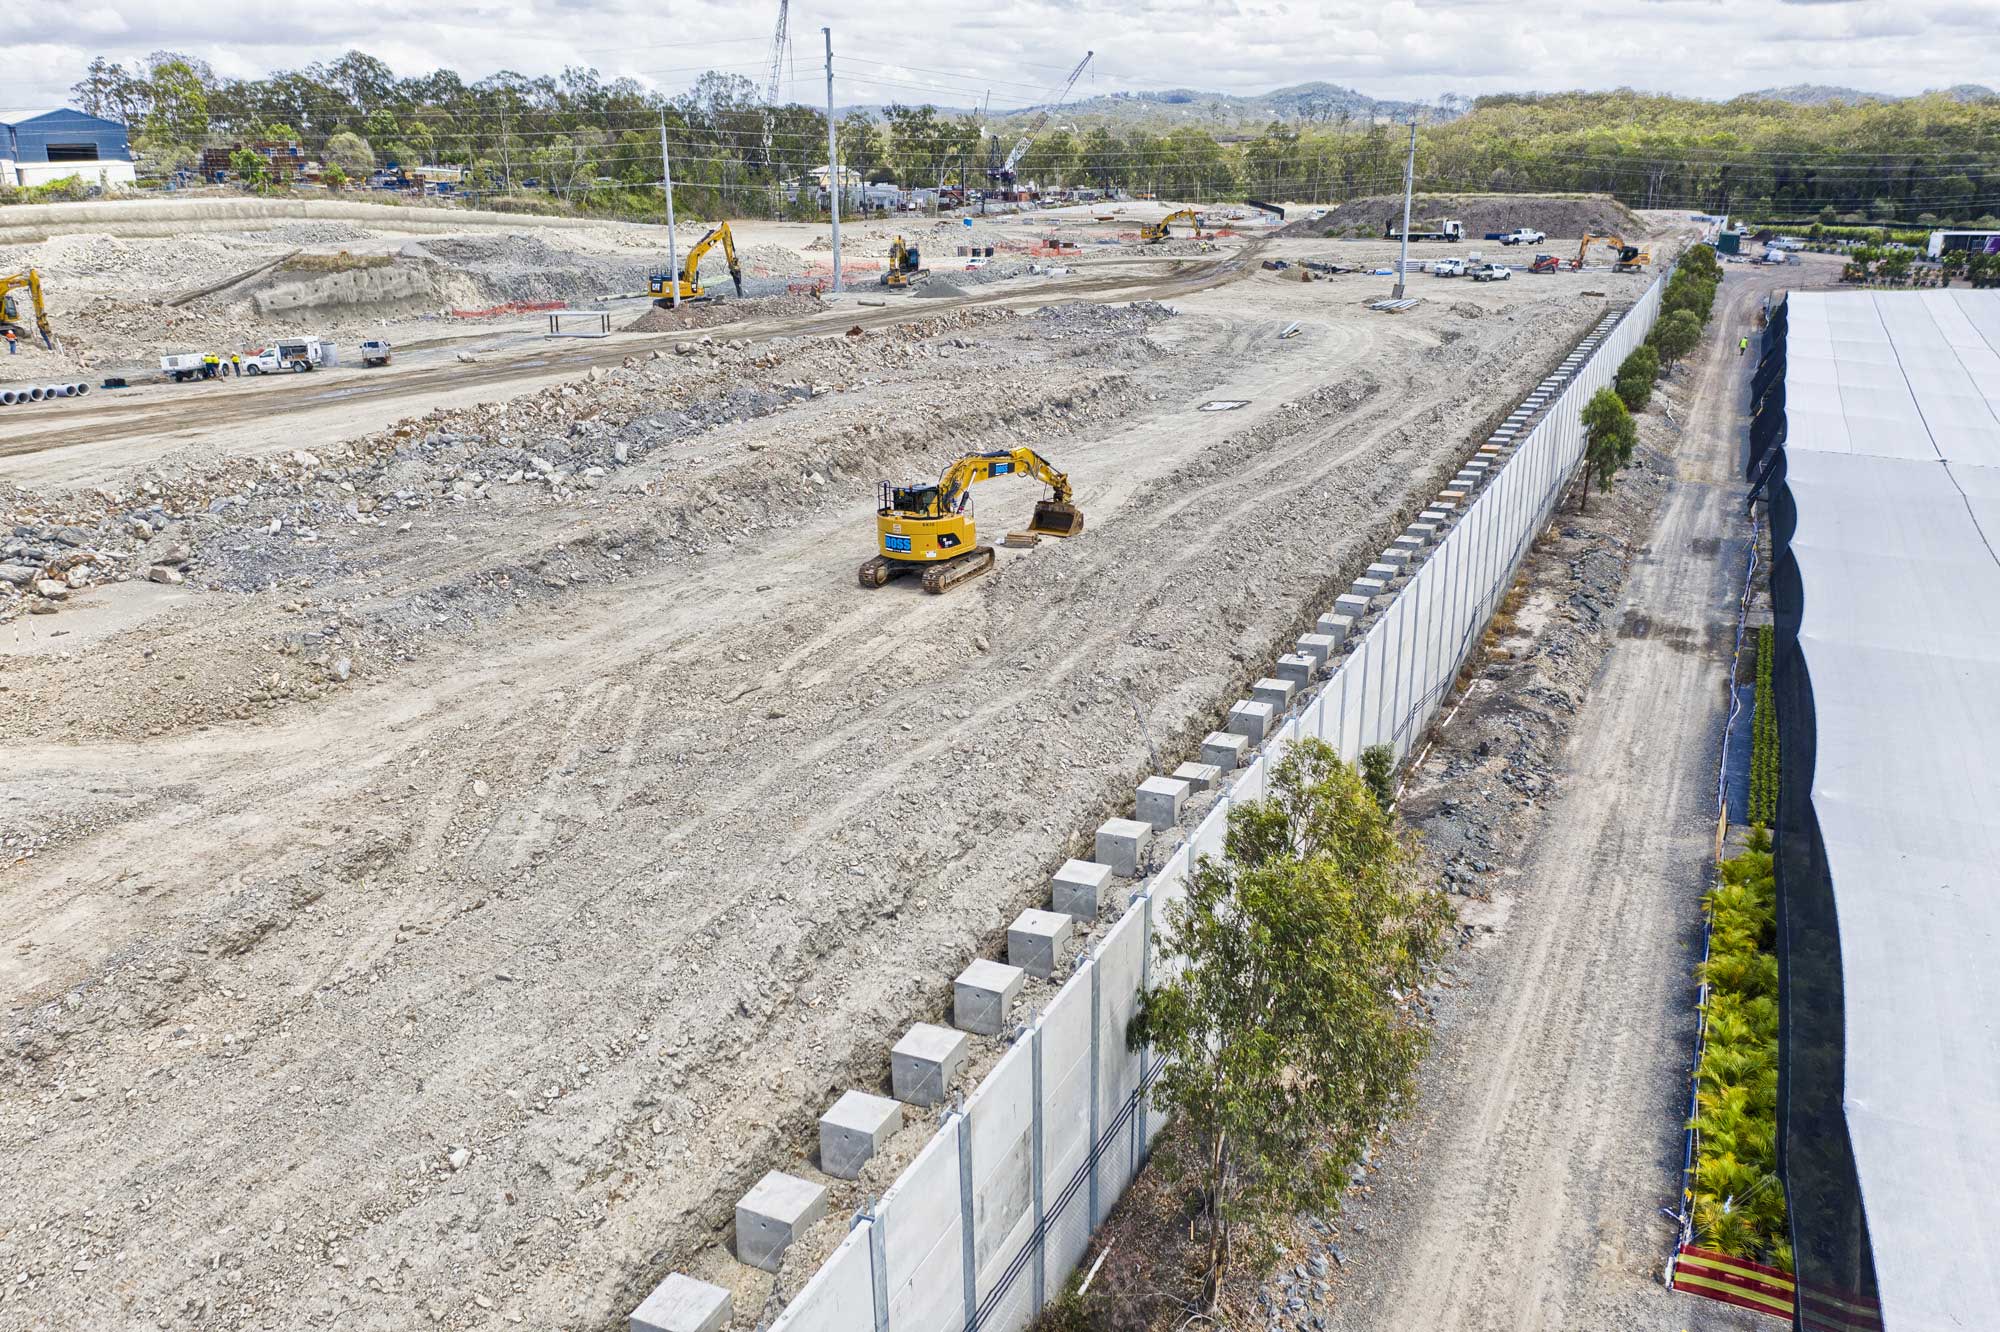 Drone photography of Concrib retaining wall under construction at Yatala